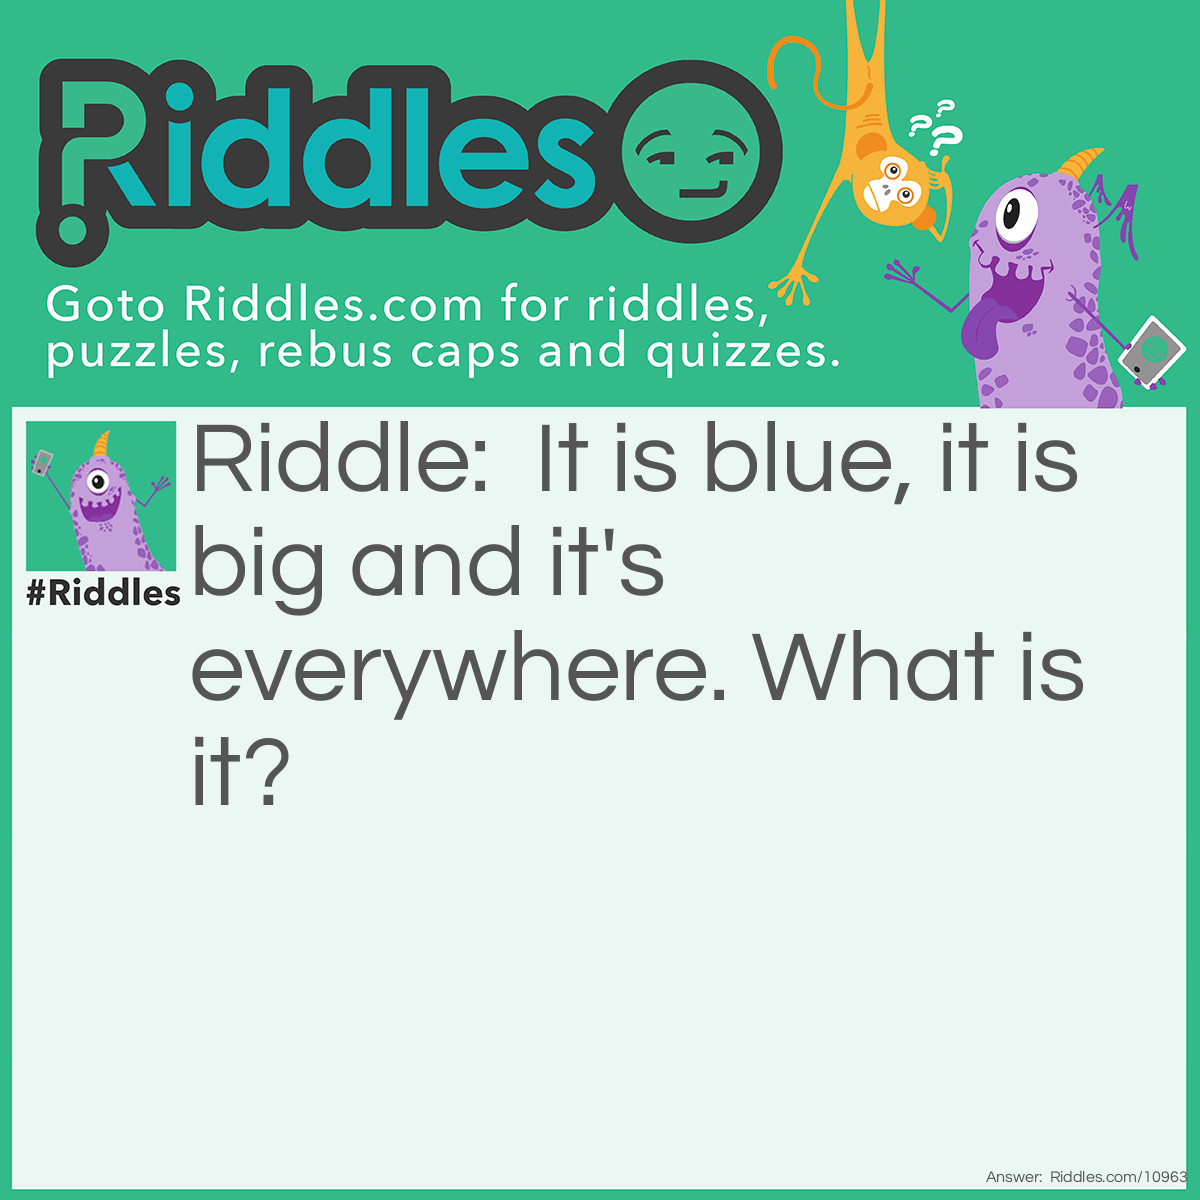 Riddle: It is blue, it is big and it's everywhere. What is it? Answer: Water.